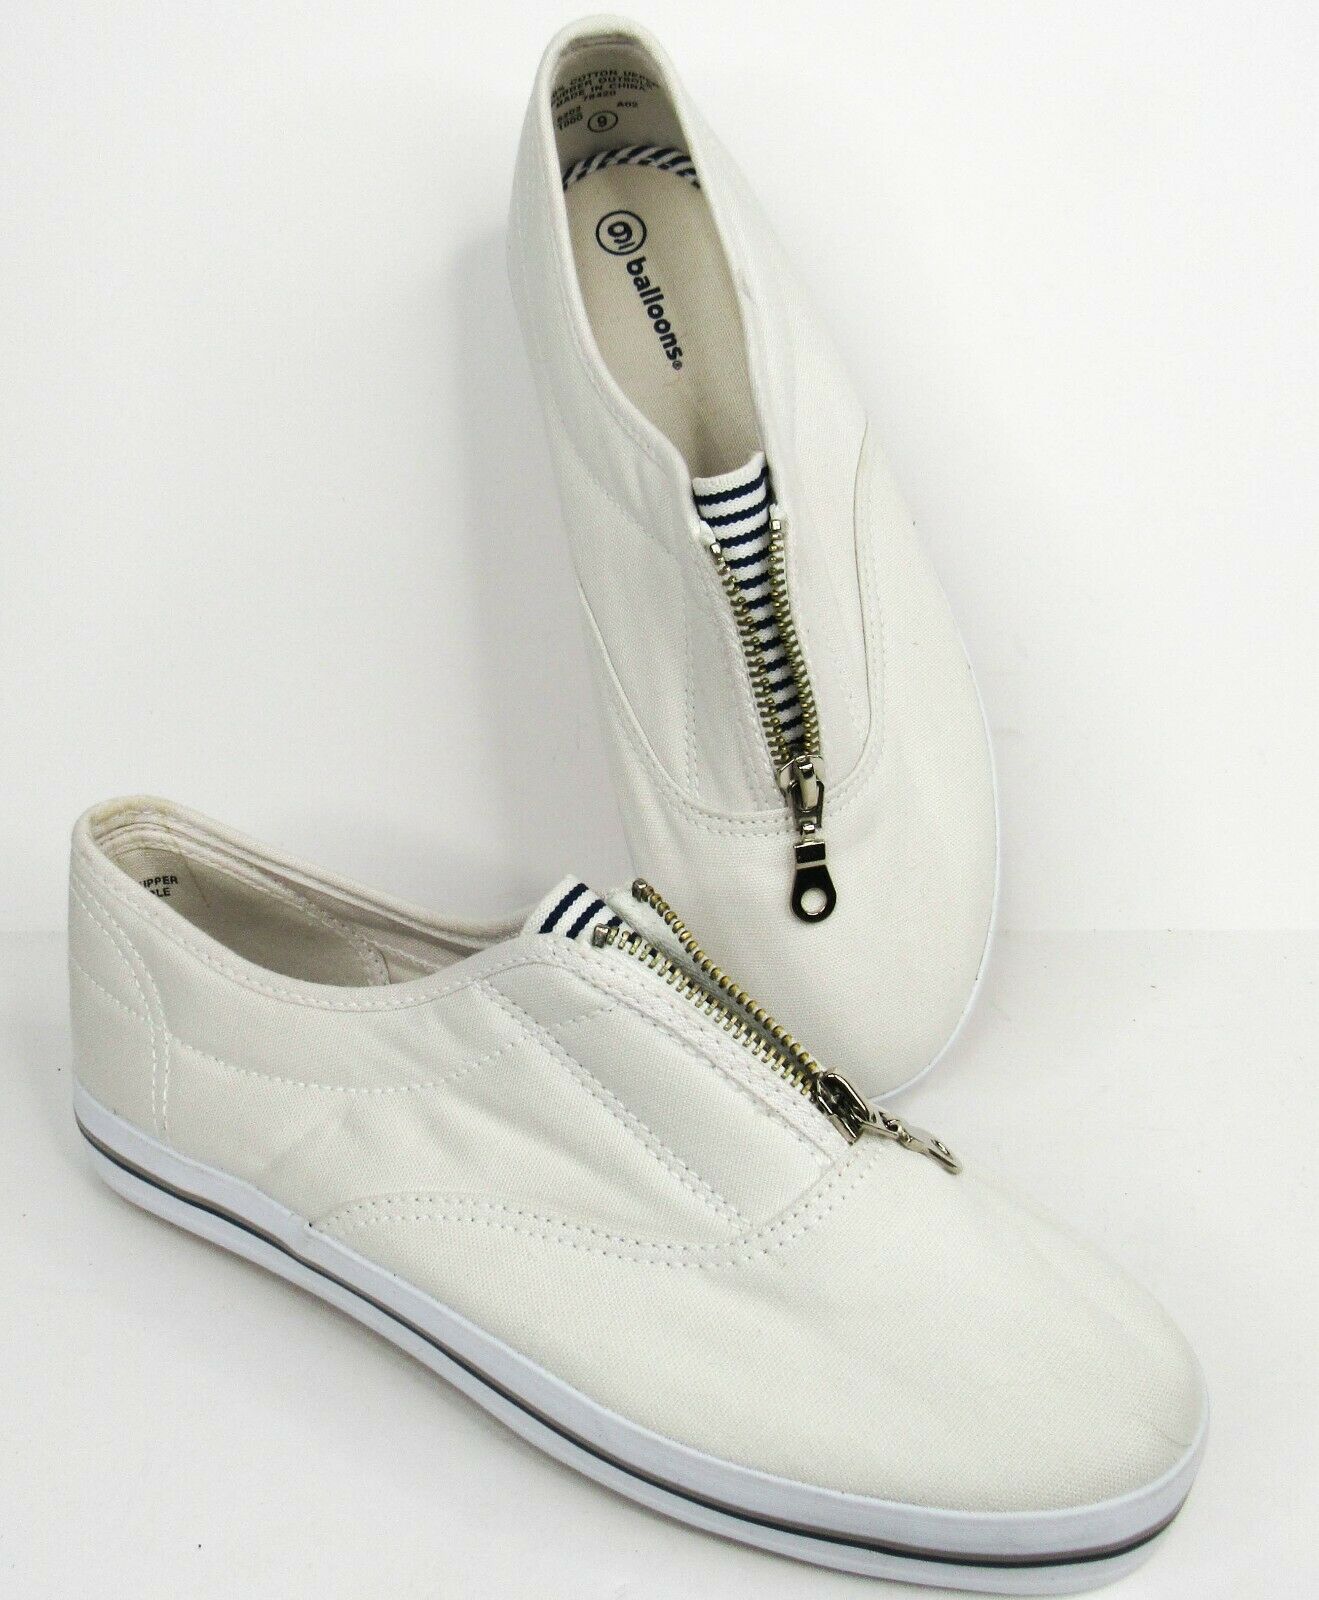 Vintage 90s Balloons White Canvas Sneakers Flat Shoes Size 9 Zipper Slip-On NOS